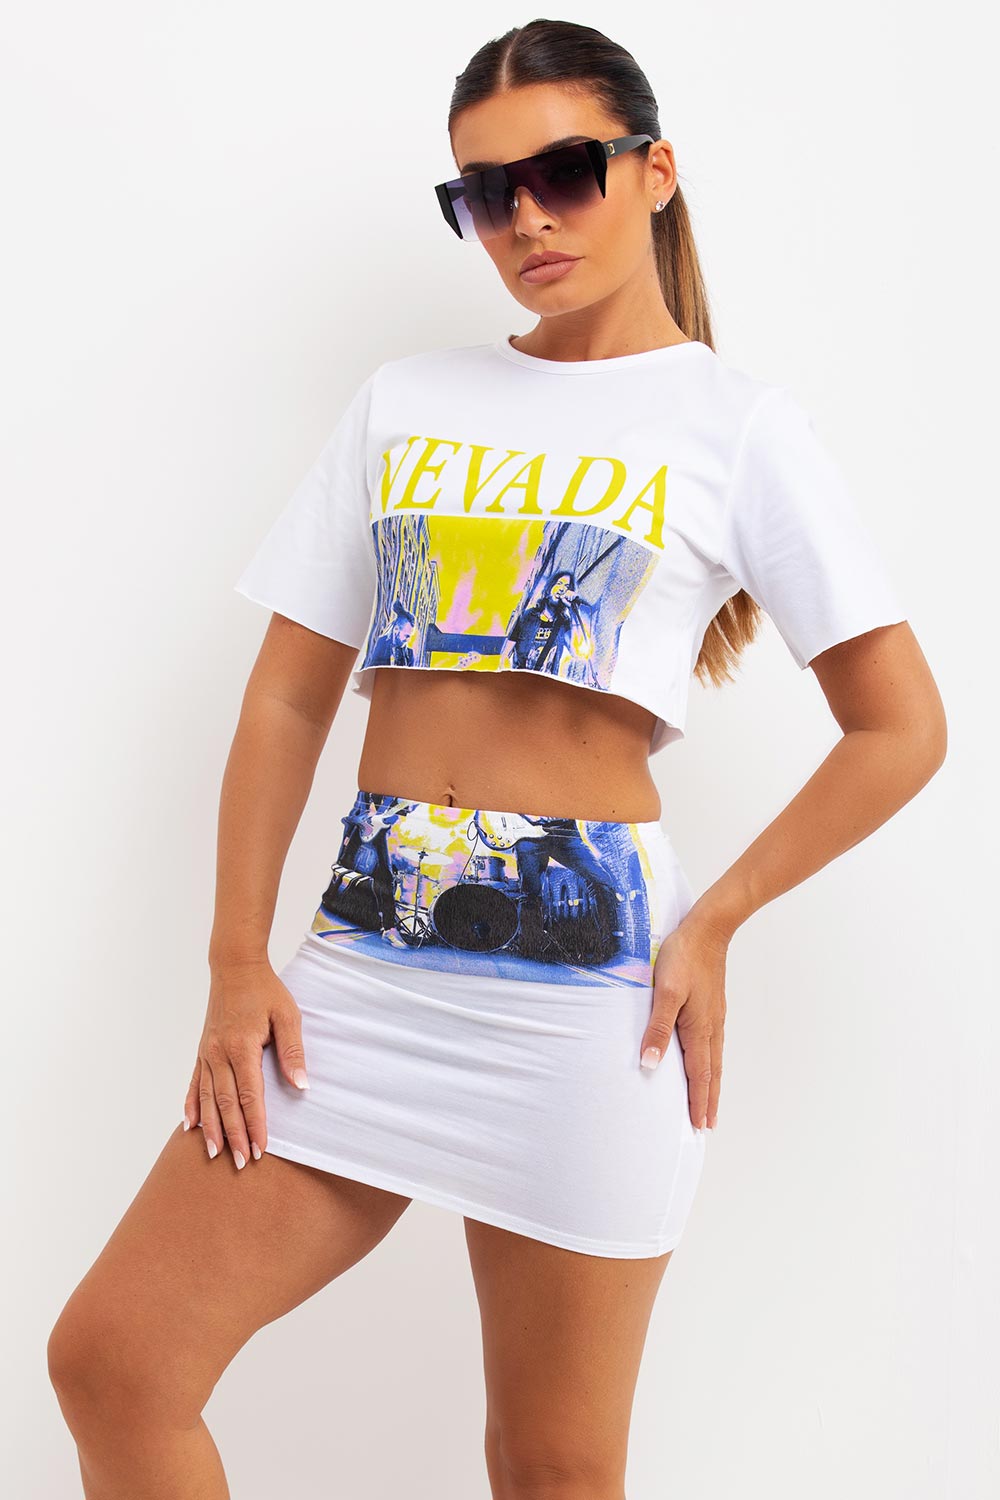 mini skirt and crop t shirt co ord with nevada slogan